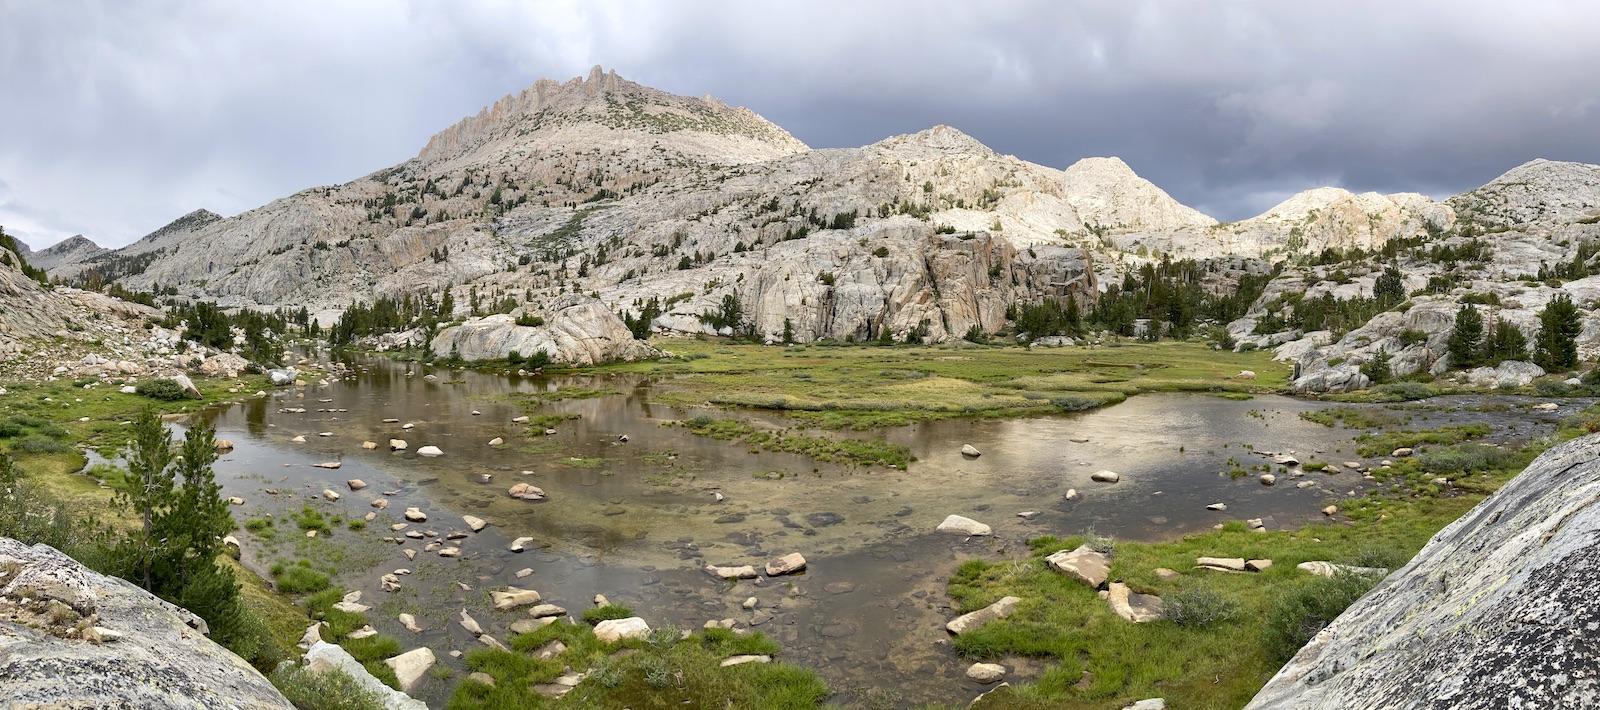 Seven Gables Mountains in the Sierras